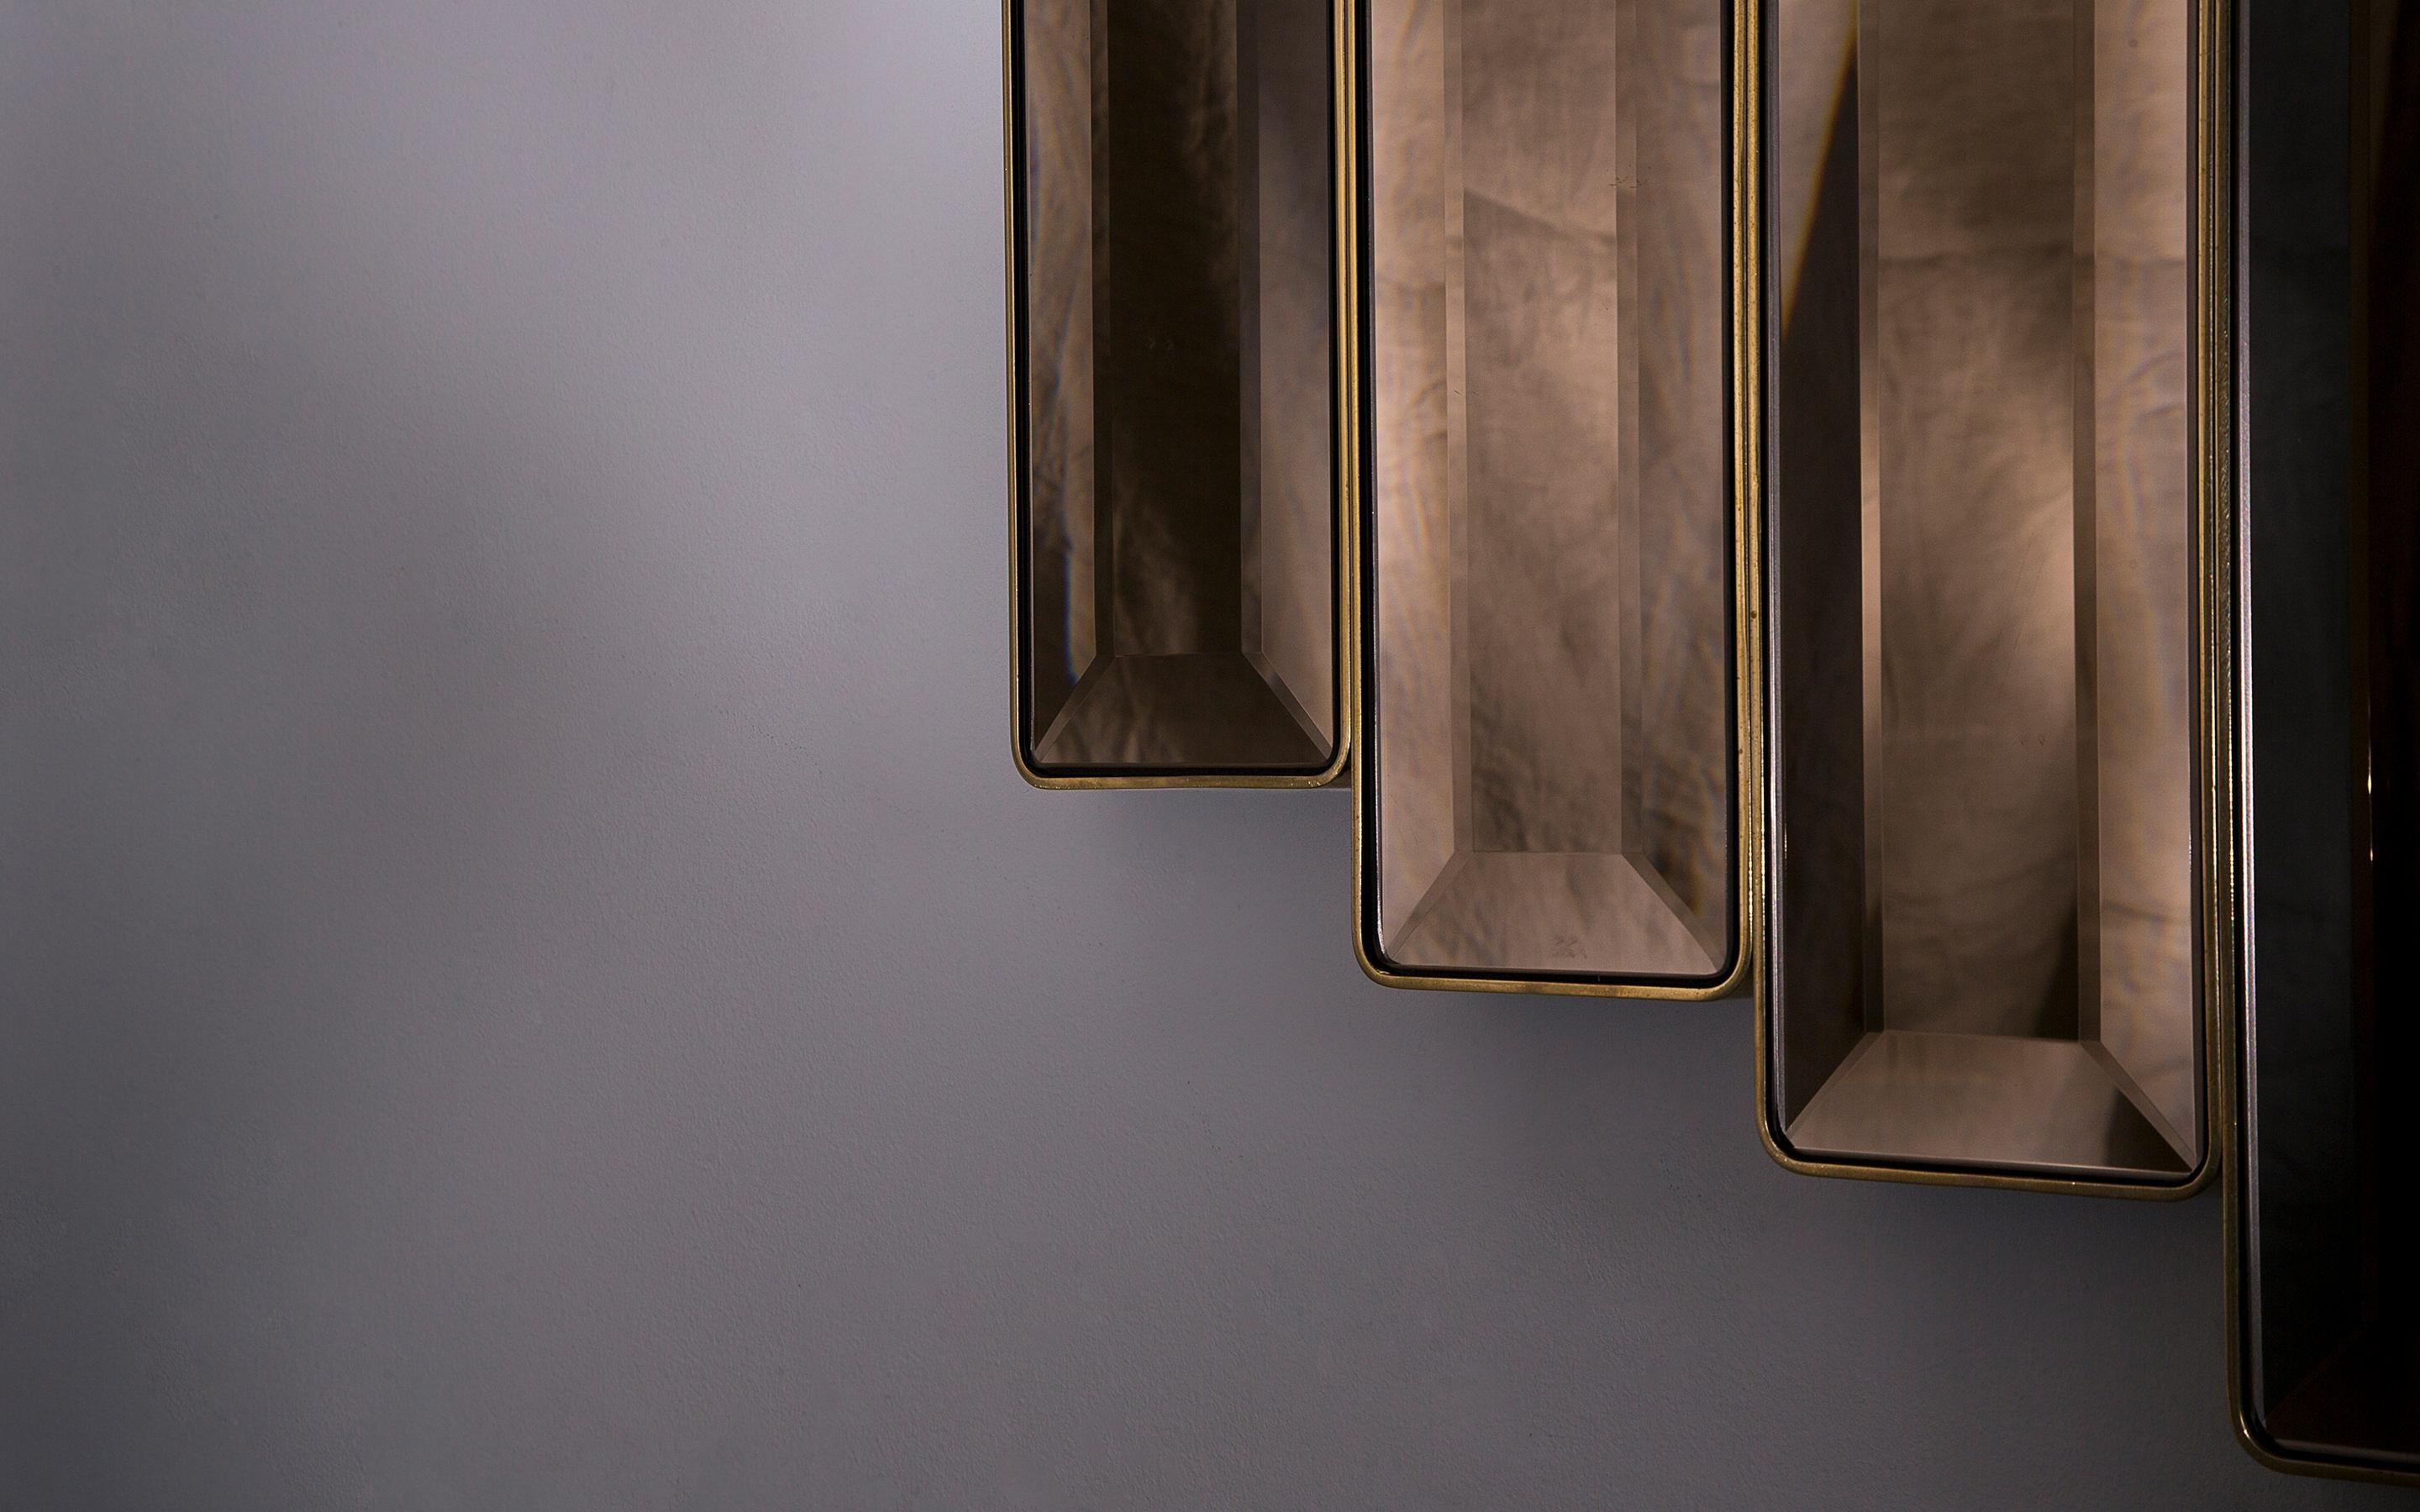 Tata Polished brass sculptural mirror signed by Novocastrian
Measures: 110 (W) x 100 (H) x 2 (D)
Materials: Polished Brass
Custom sizes available.

Wall-mounted Tata mirror with polished brass frame. Beveled bronze or grey tinted glass